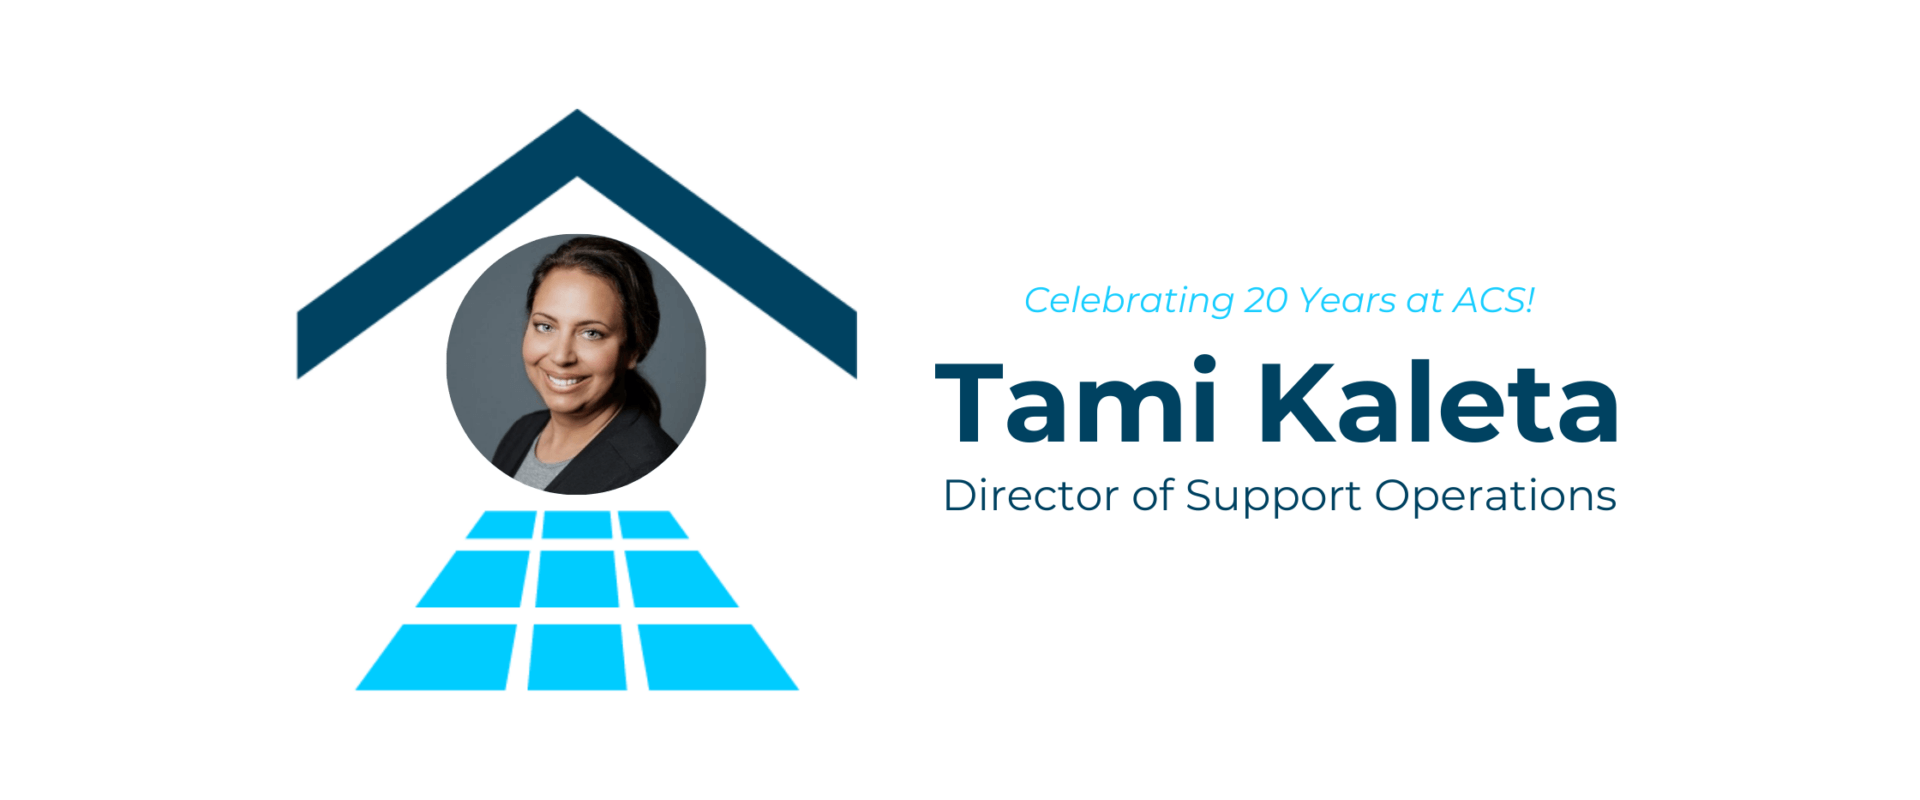 Celebrating 20 Years at ACS Tami Kaleta, Director of Support Operations